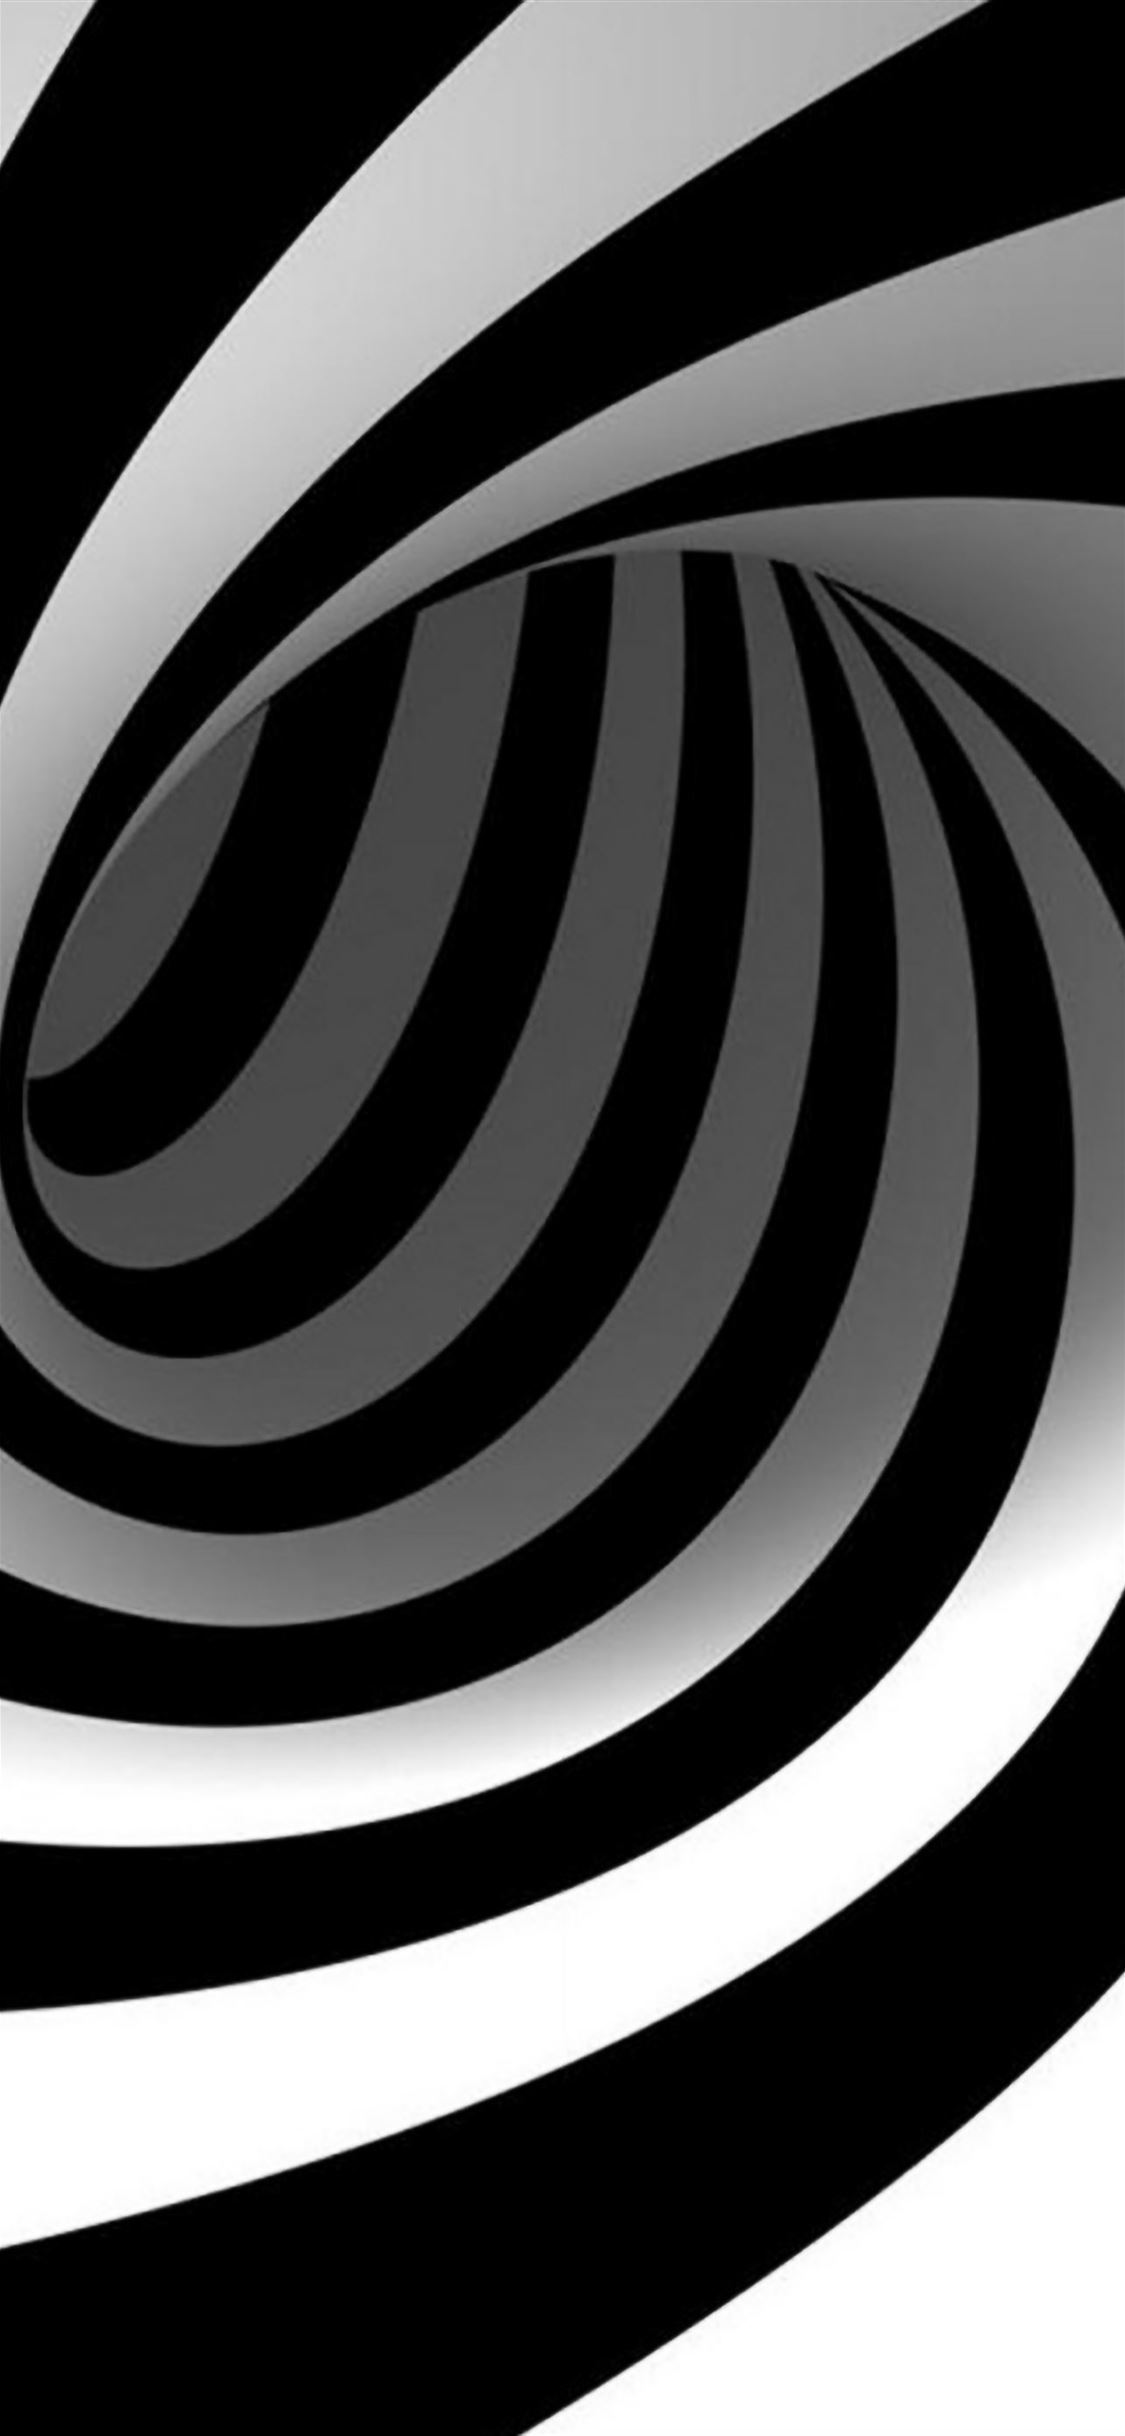 3d Abstract Swirl Iphone Wallpapers Free Download